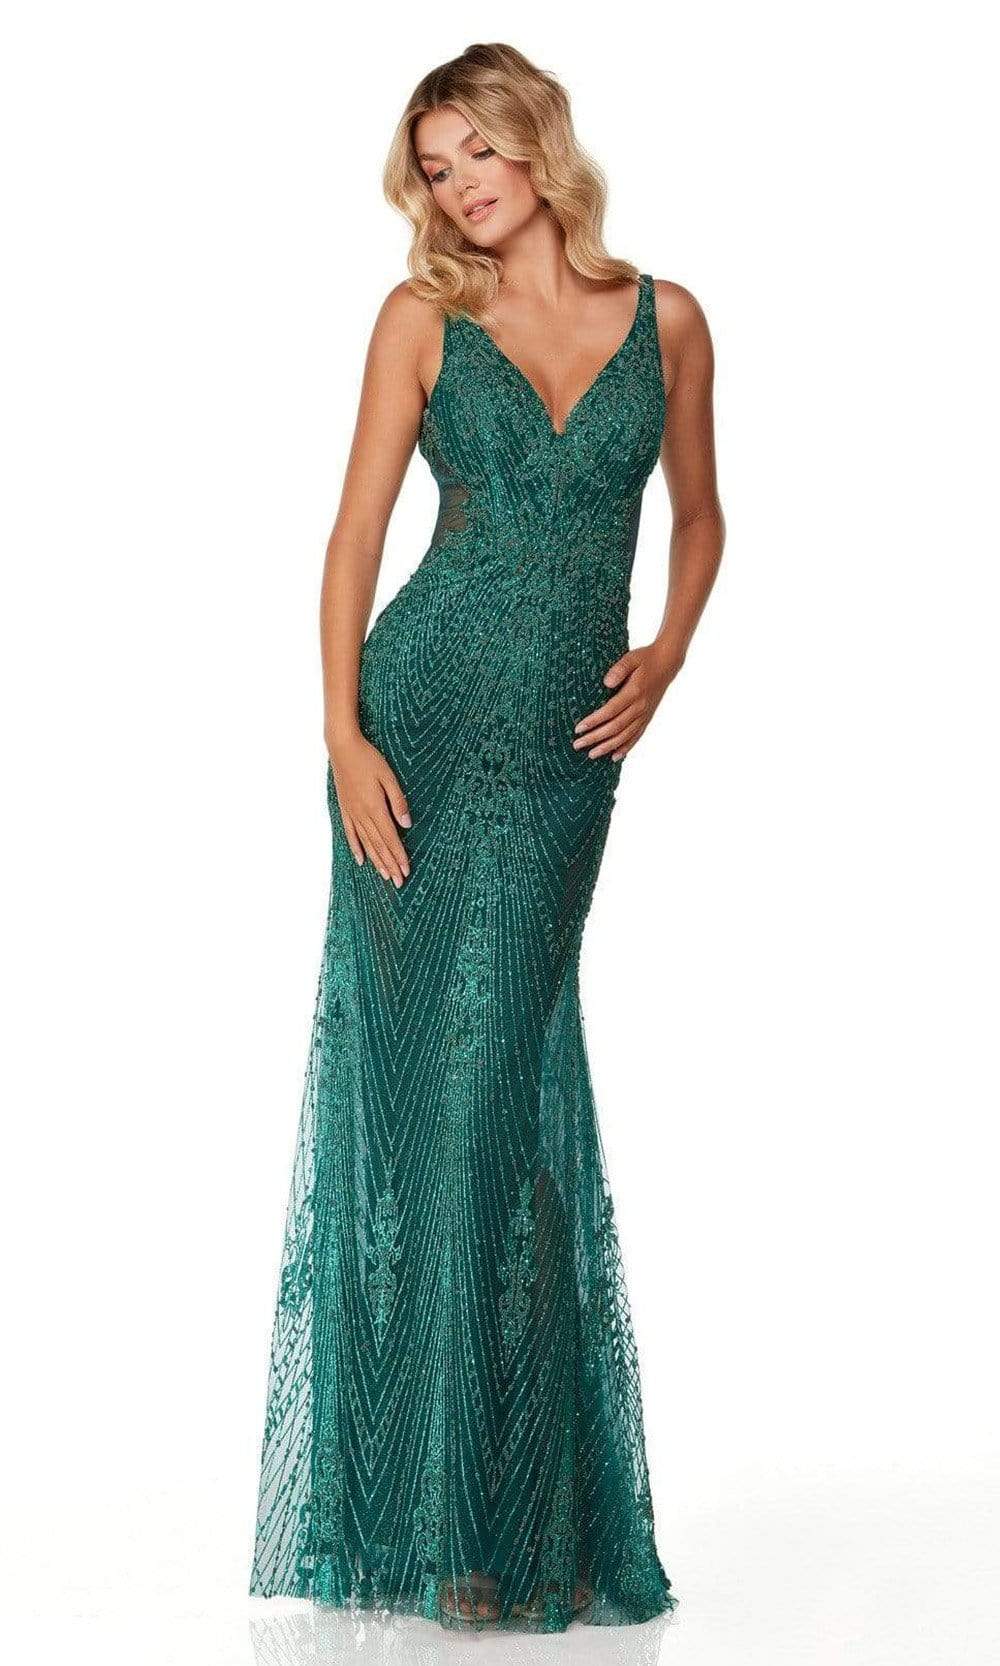 Alyce Paris - Embellished Gown 61199 In Green